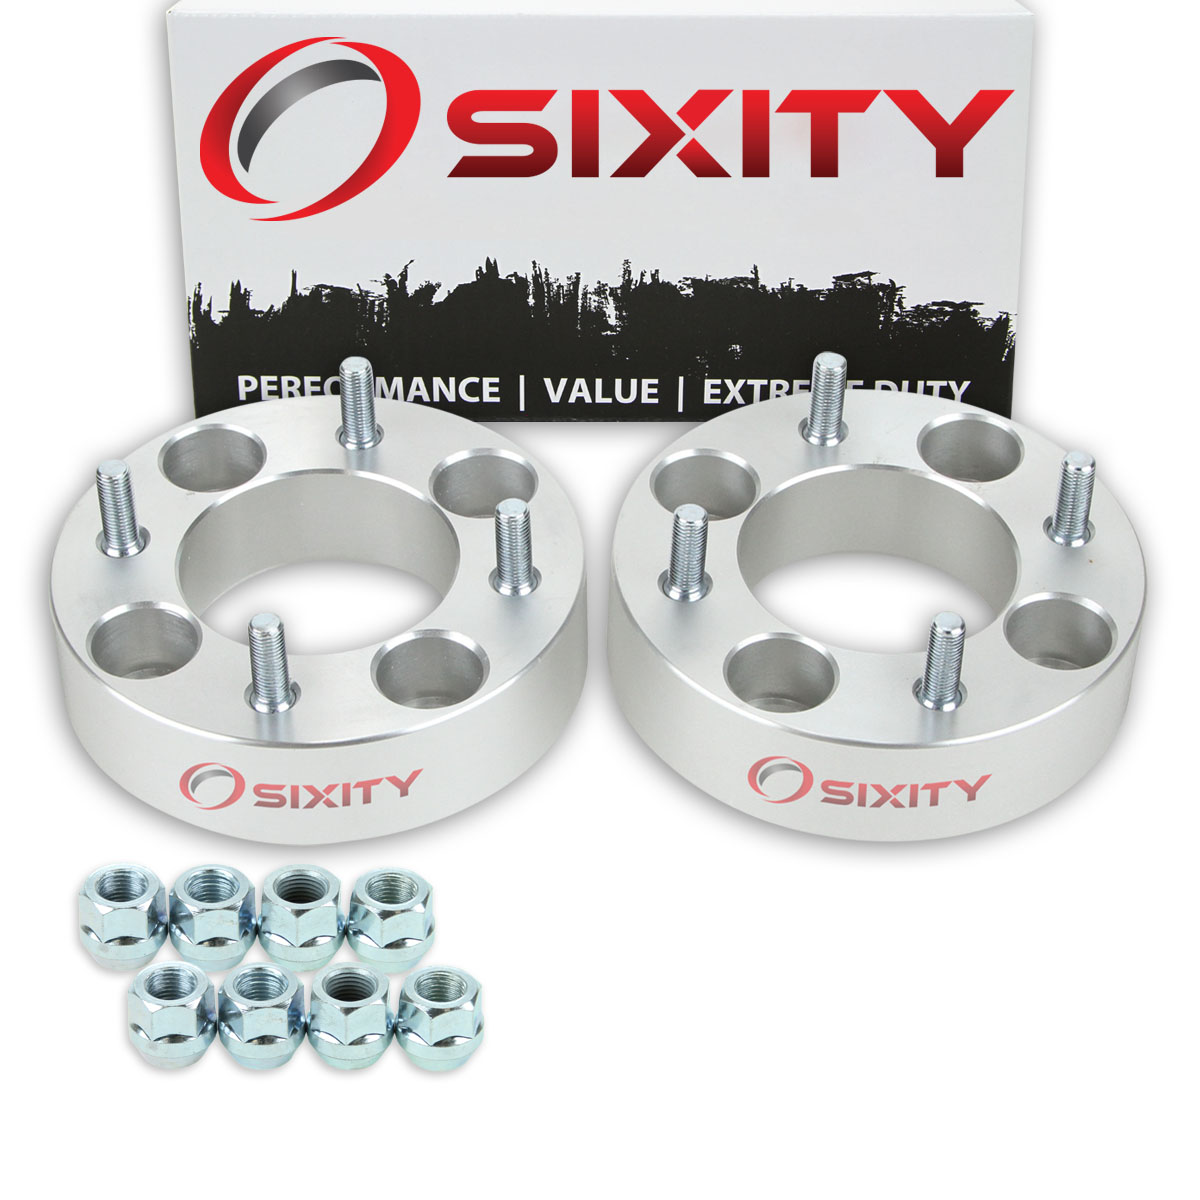 Sixity 2 pc 1.5 Inch Honda Rincon TRX 680 4/110 Front Wheel Spacers